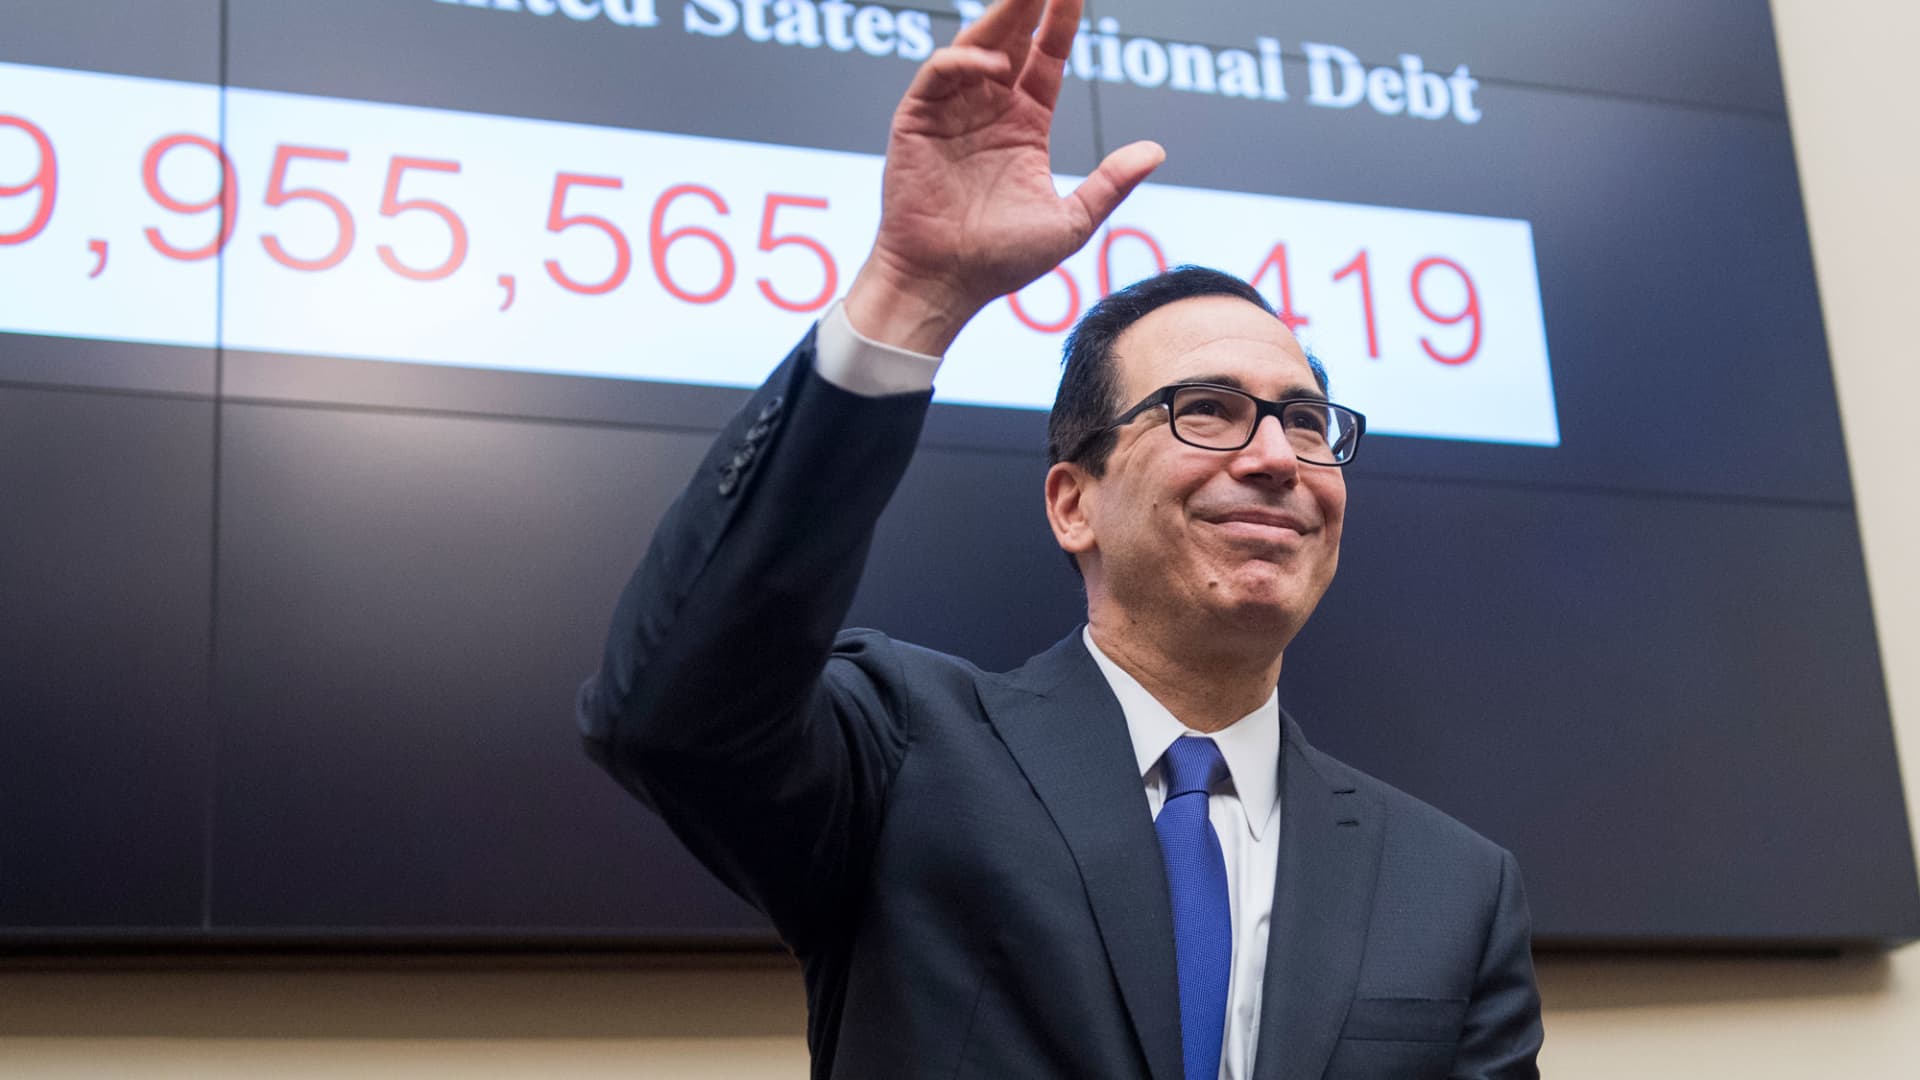 Federal deficit increases 26% to $984 billion for fiscal 2019, highest in 7 years